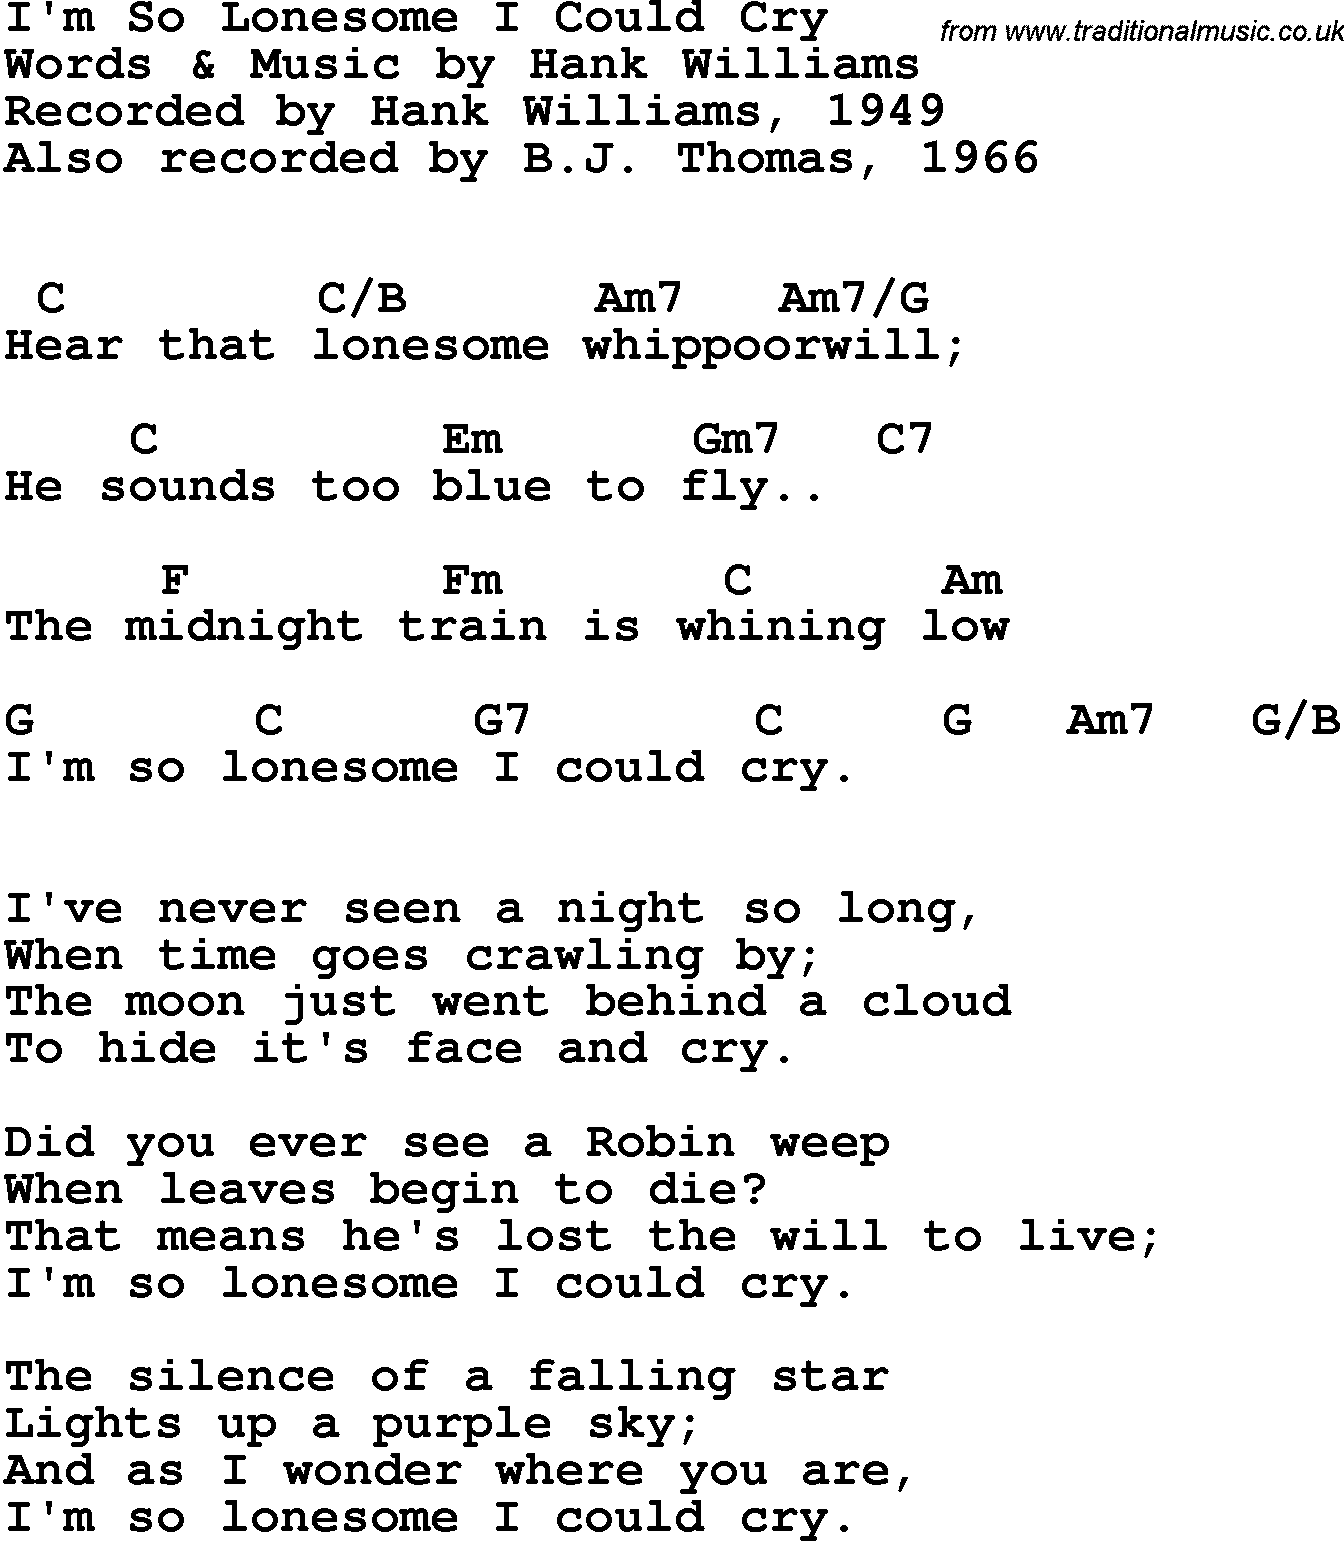 Song Lyrics with guitar chords for I'm So Lonesome I Could Cry - Hank Williams, 1949